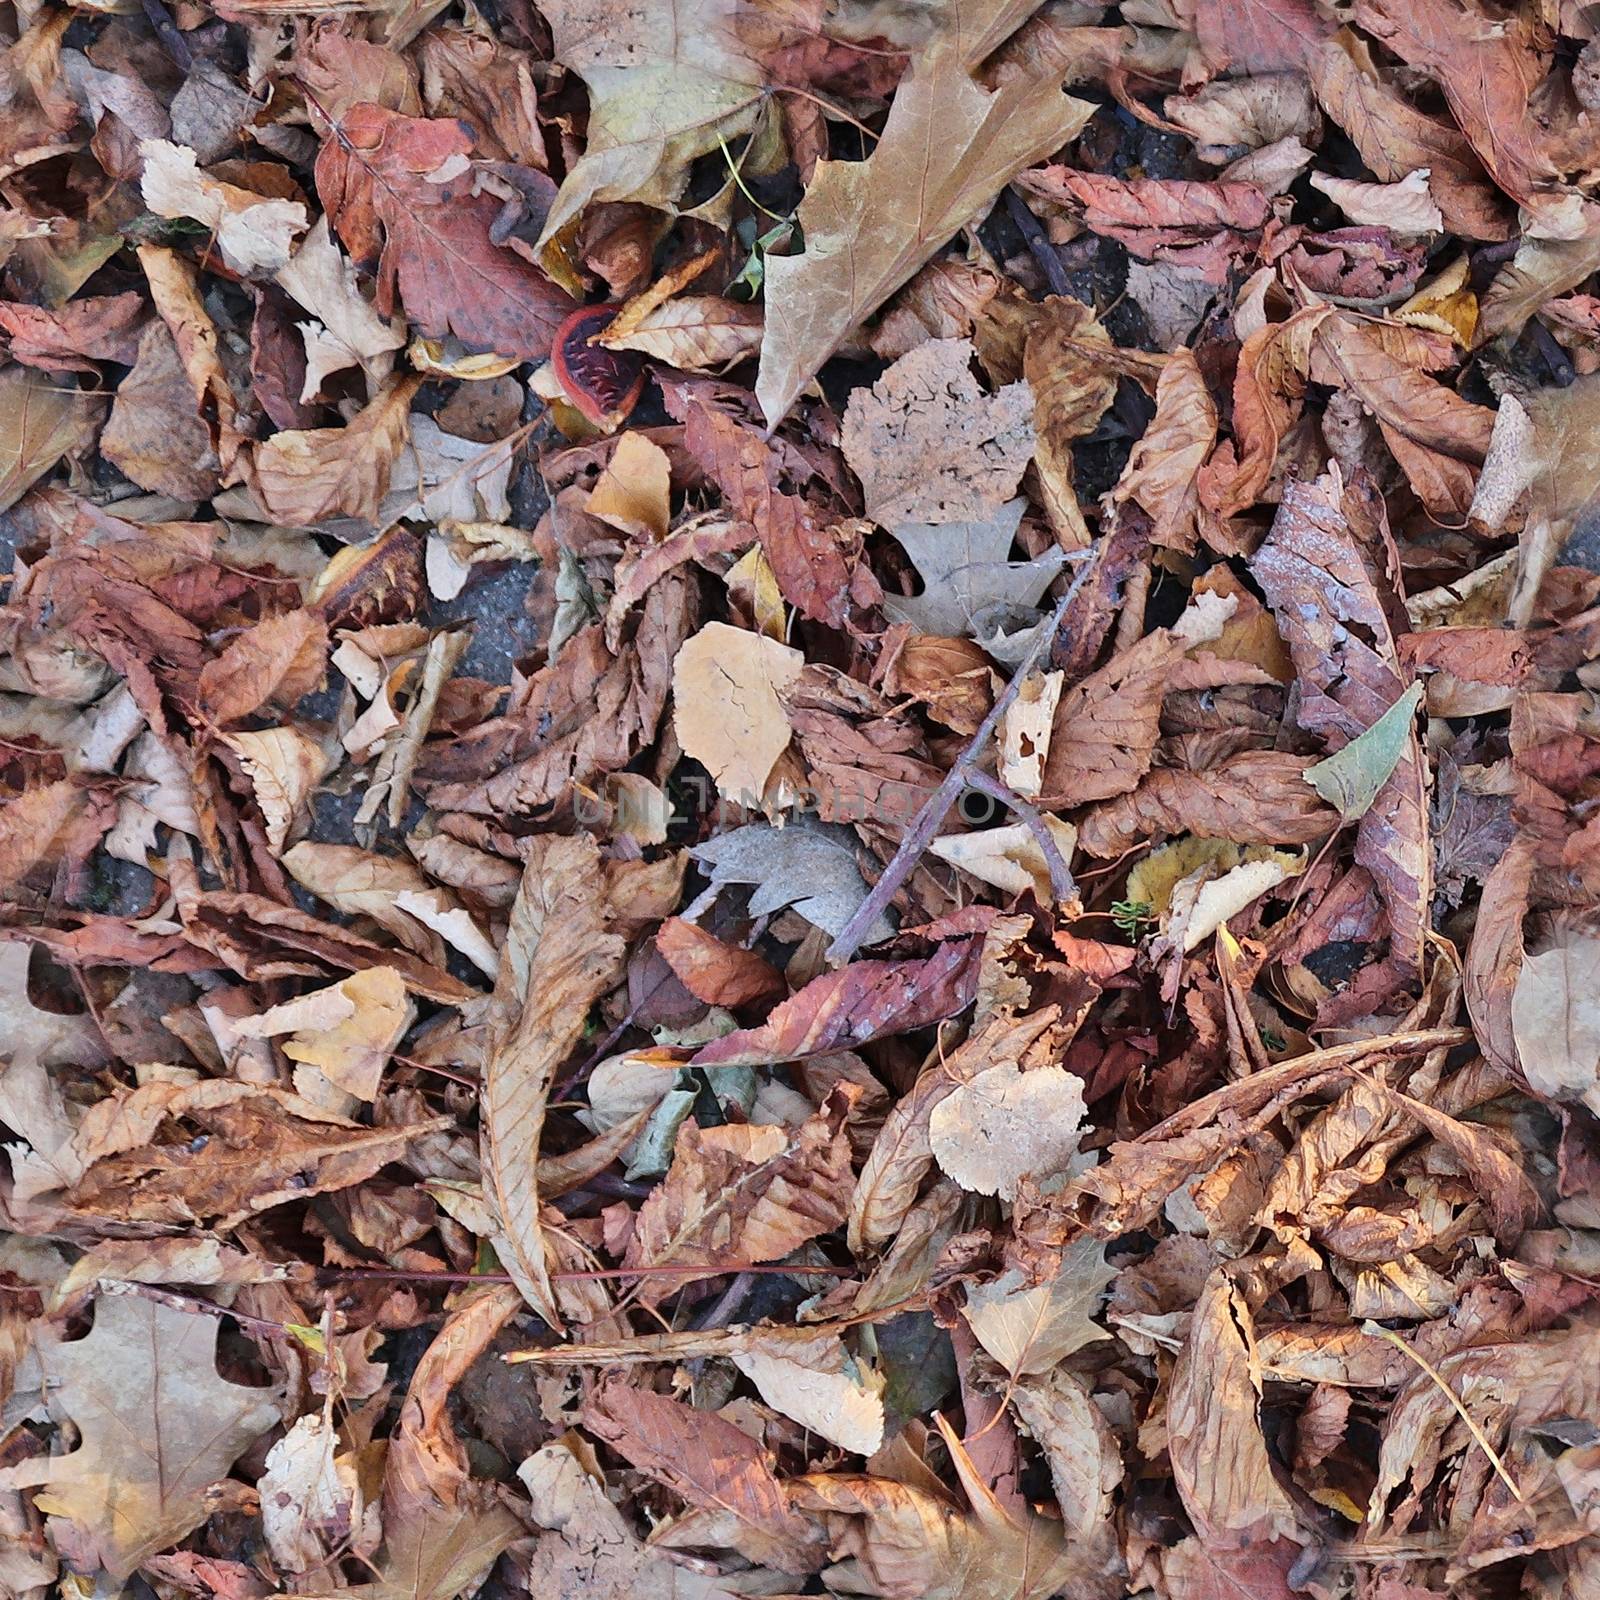 Photo realistic seamless texture pattern of autumn leaves on a forest ground